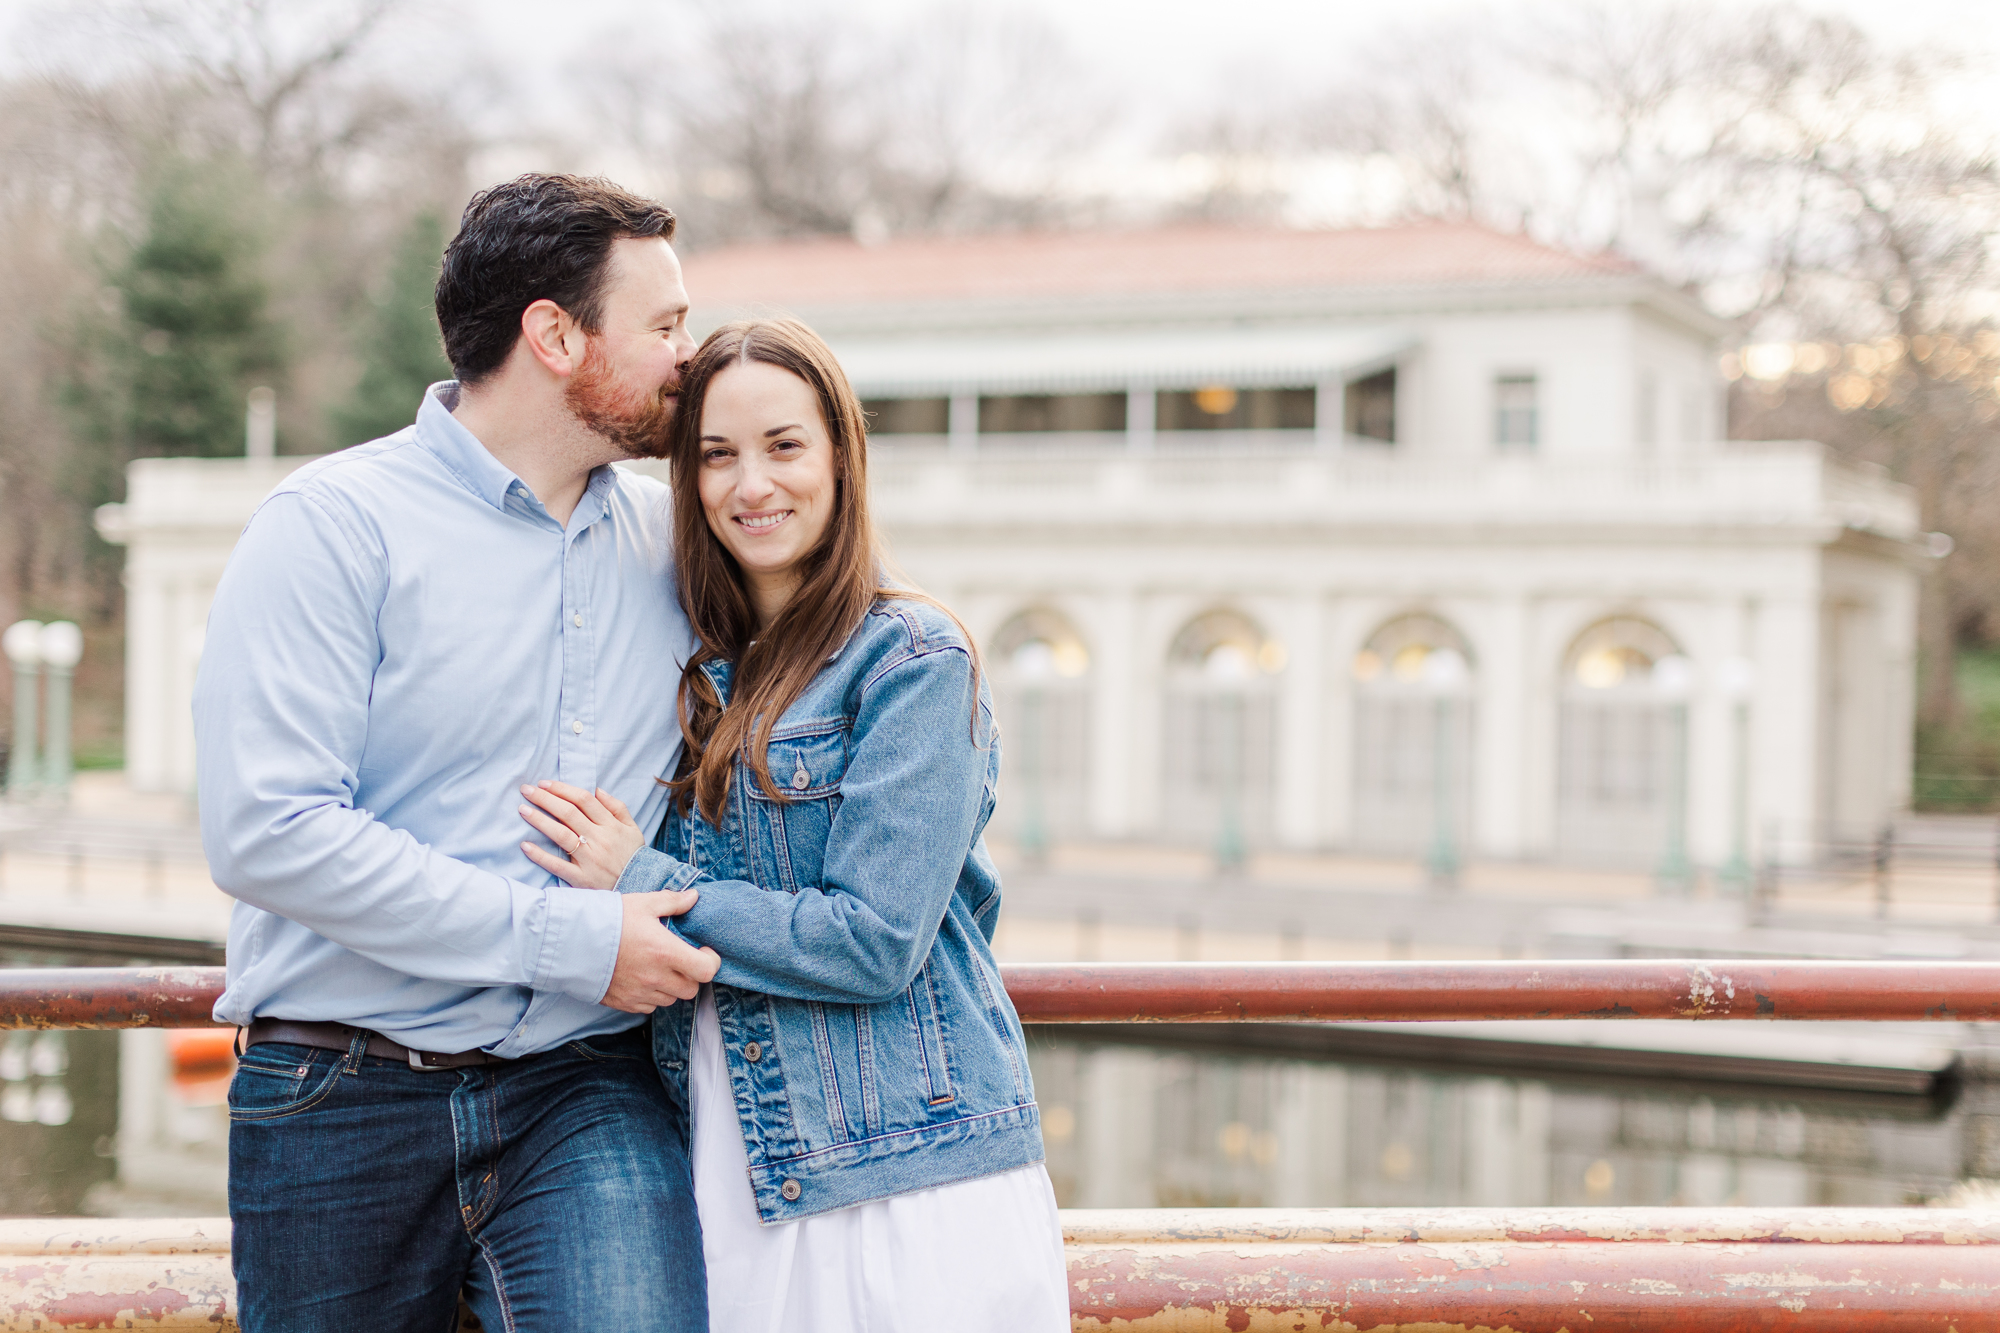 Cute Boathouse Engagement Photos In Prospect Park